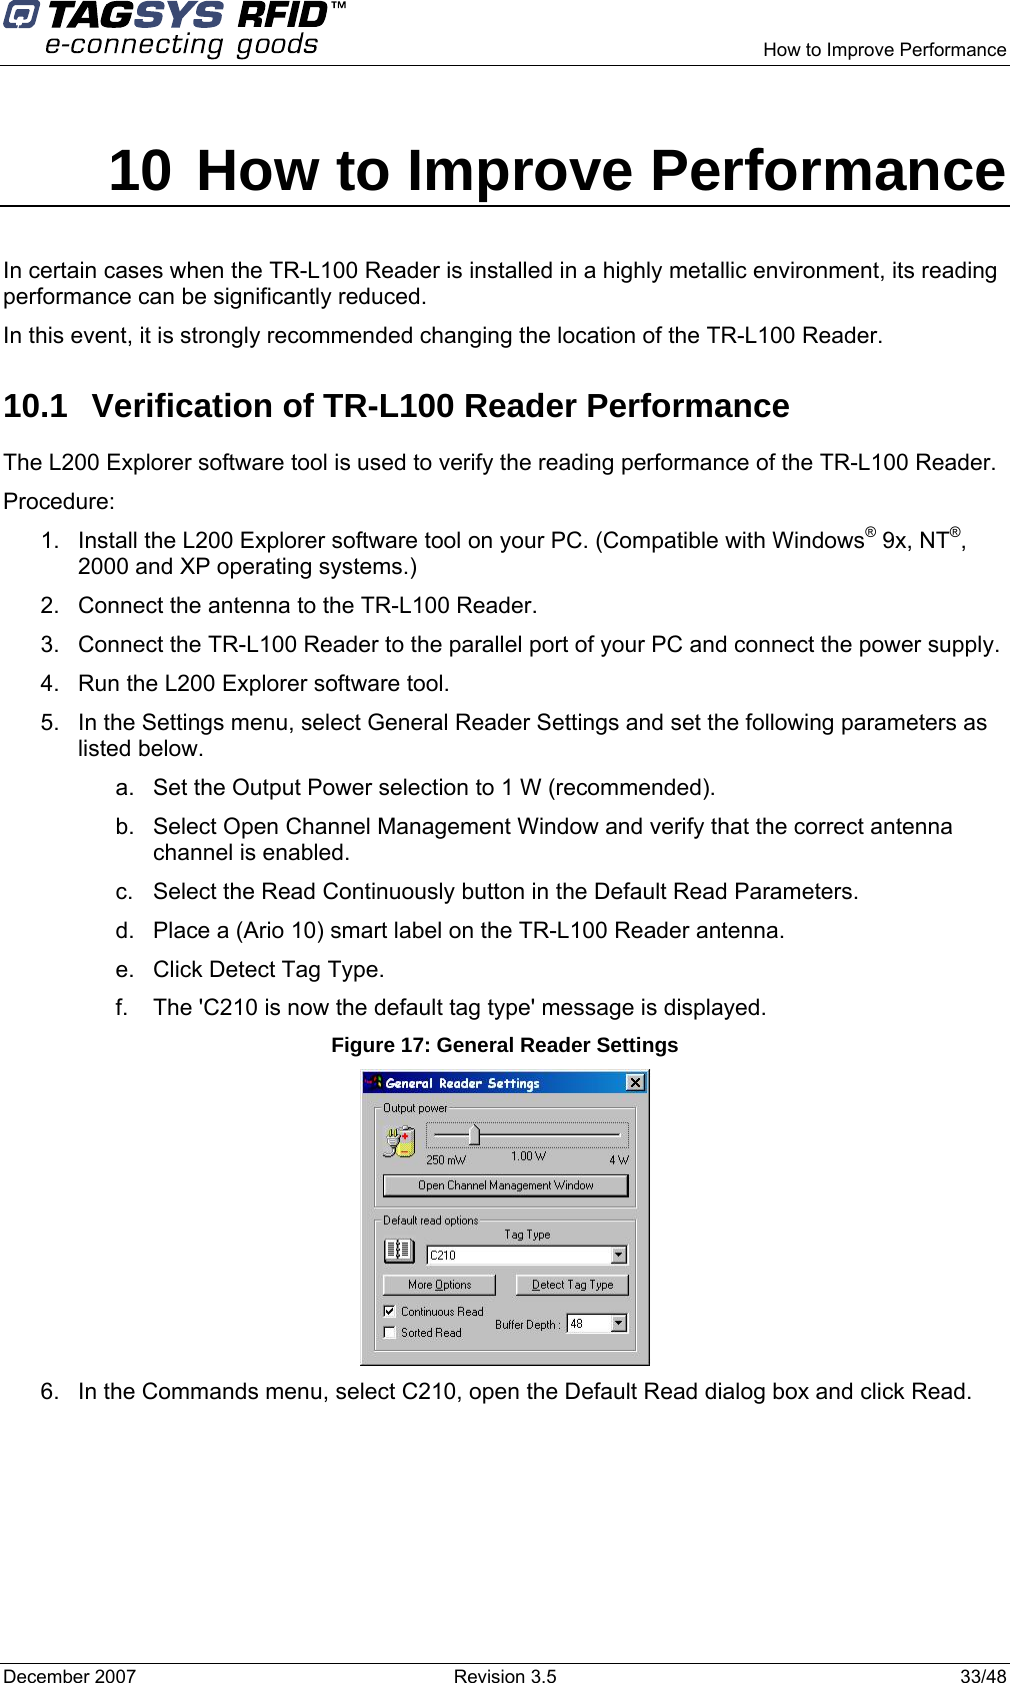      How to Improve Performance December 2007  Revision 3.5  33/48 10 How to Improve Performance In certain cases when the TR-L100 Reader is installed in a highly metallic environment, its reading performance can be significantly reduced.  In this event, it is strongly recommended changing the location of the TR-L100 Reader. 10.1  Verification of TR-L100 Reader Performance The L200 Explorer software tool is used to verify the reading performance of the TR-L100 Reader. Procedure: 1.  Install the L200 Explorer software tool on your PC. (Compatible with Windows® 9x, NT®, 2000 and XP operating systems.) 2.  Connect the antenna to the TR-L100 Reader. 3.  Connect the TR-L100 Reader to the parallel port of your PC and connect the power supply. 4.  Run the L200 Explorer software tool. 5.  In the Settings menu, select General Reader Settings and set the following parameters as listed below. a.  Set the Output Power selection to 1 W (recommended). b.  Select Open Channel Management Window and verify that the correct antenna channel is enabled. c.  Select the Read Continuously button in the Default Read Parameters. d.  Place a (Ario 10) smart label on the TR-L100 Reader antenna. e.  Click Detect Tag Type. f.  The &apos;C210 is now the default tag type&apos; message is displayed. Figure 17: General Reader Settings  6.  In the Commands menu, select C210, open the Default Read dialog box and click Read.  